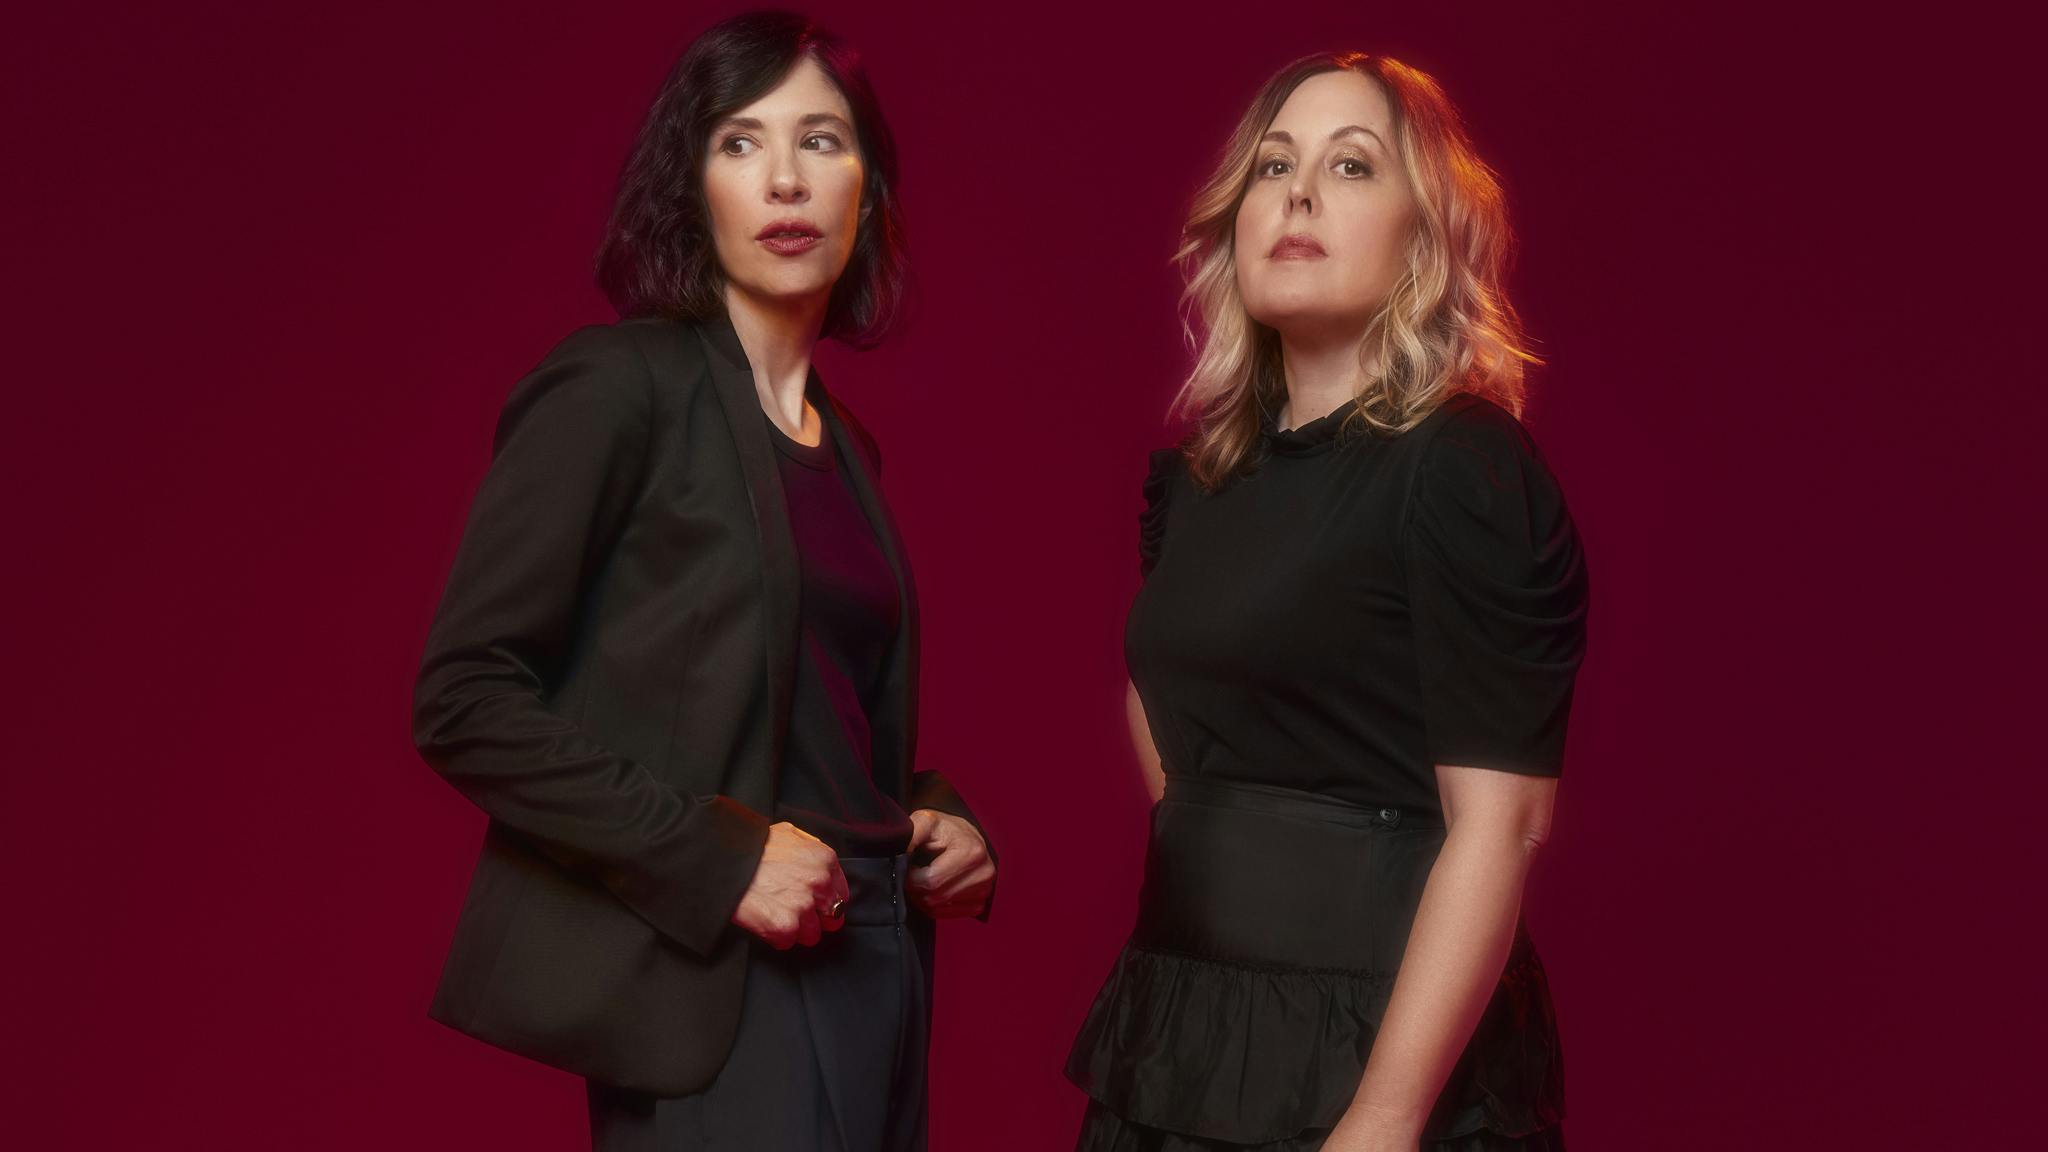 Sleater-Kinney release new single with “a big guitar riff, and an even bigger vocal”